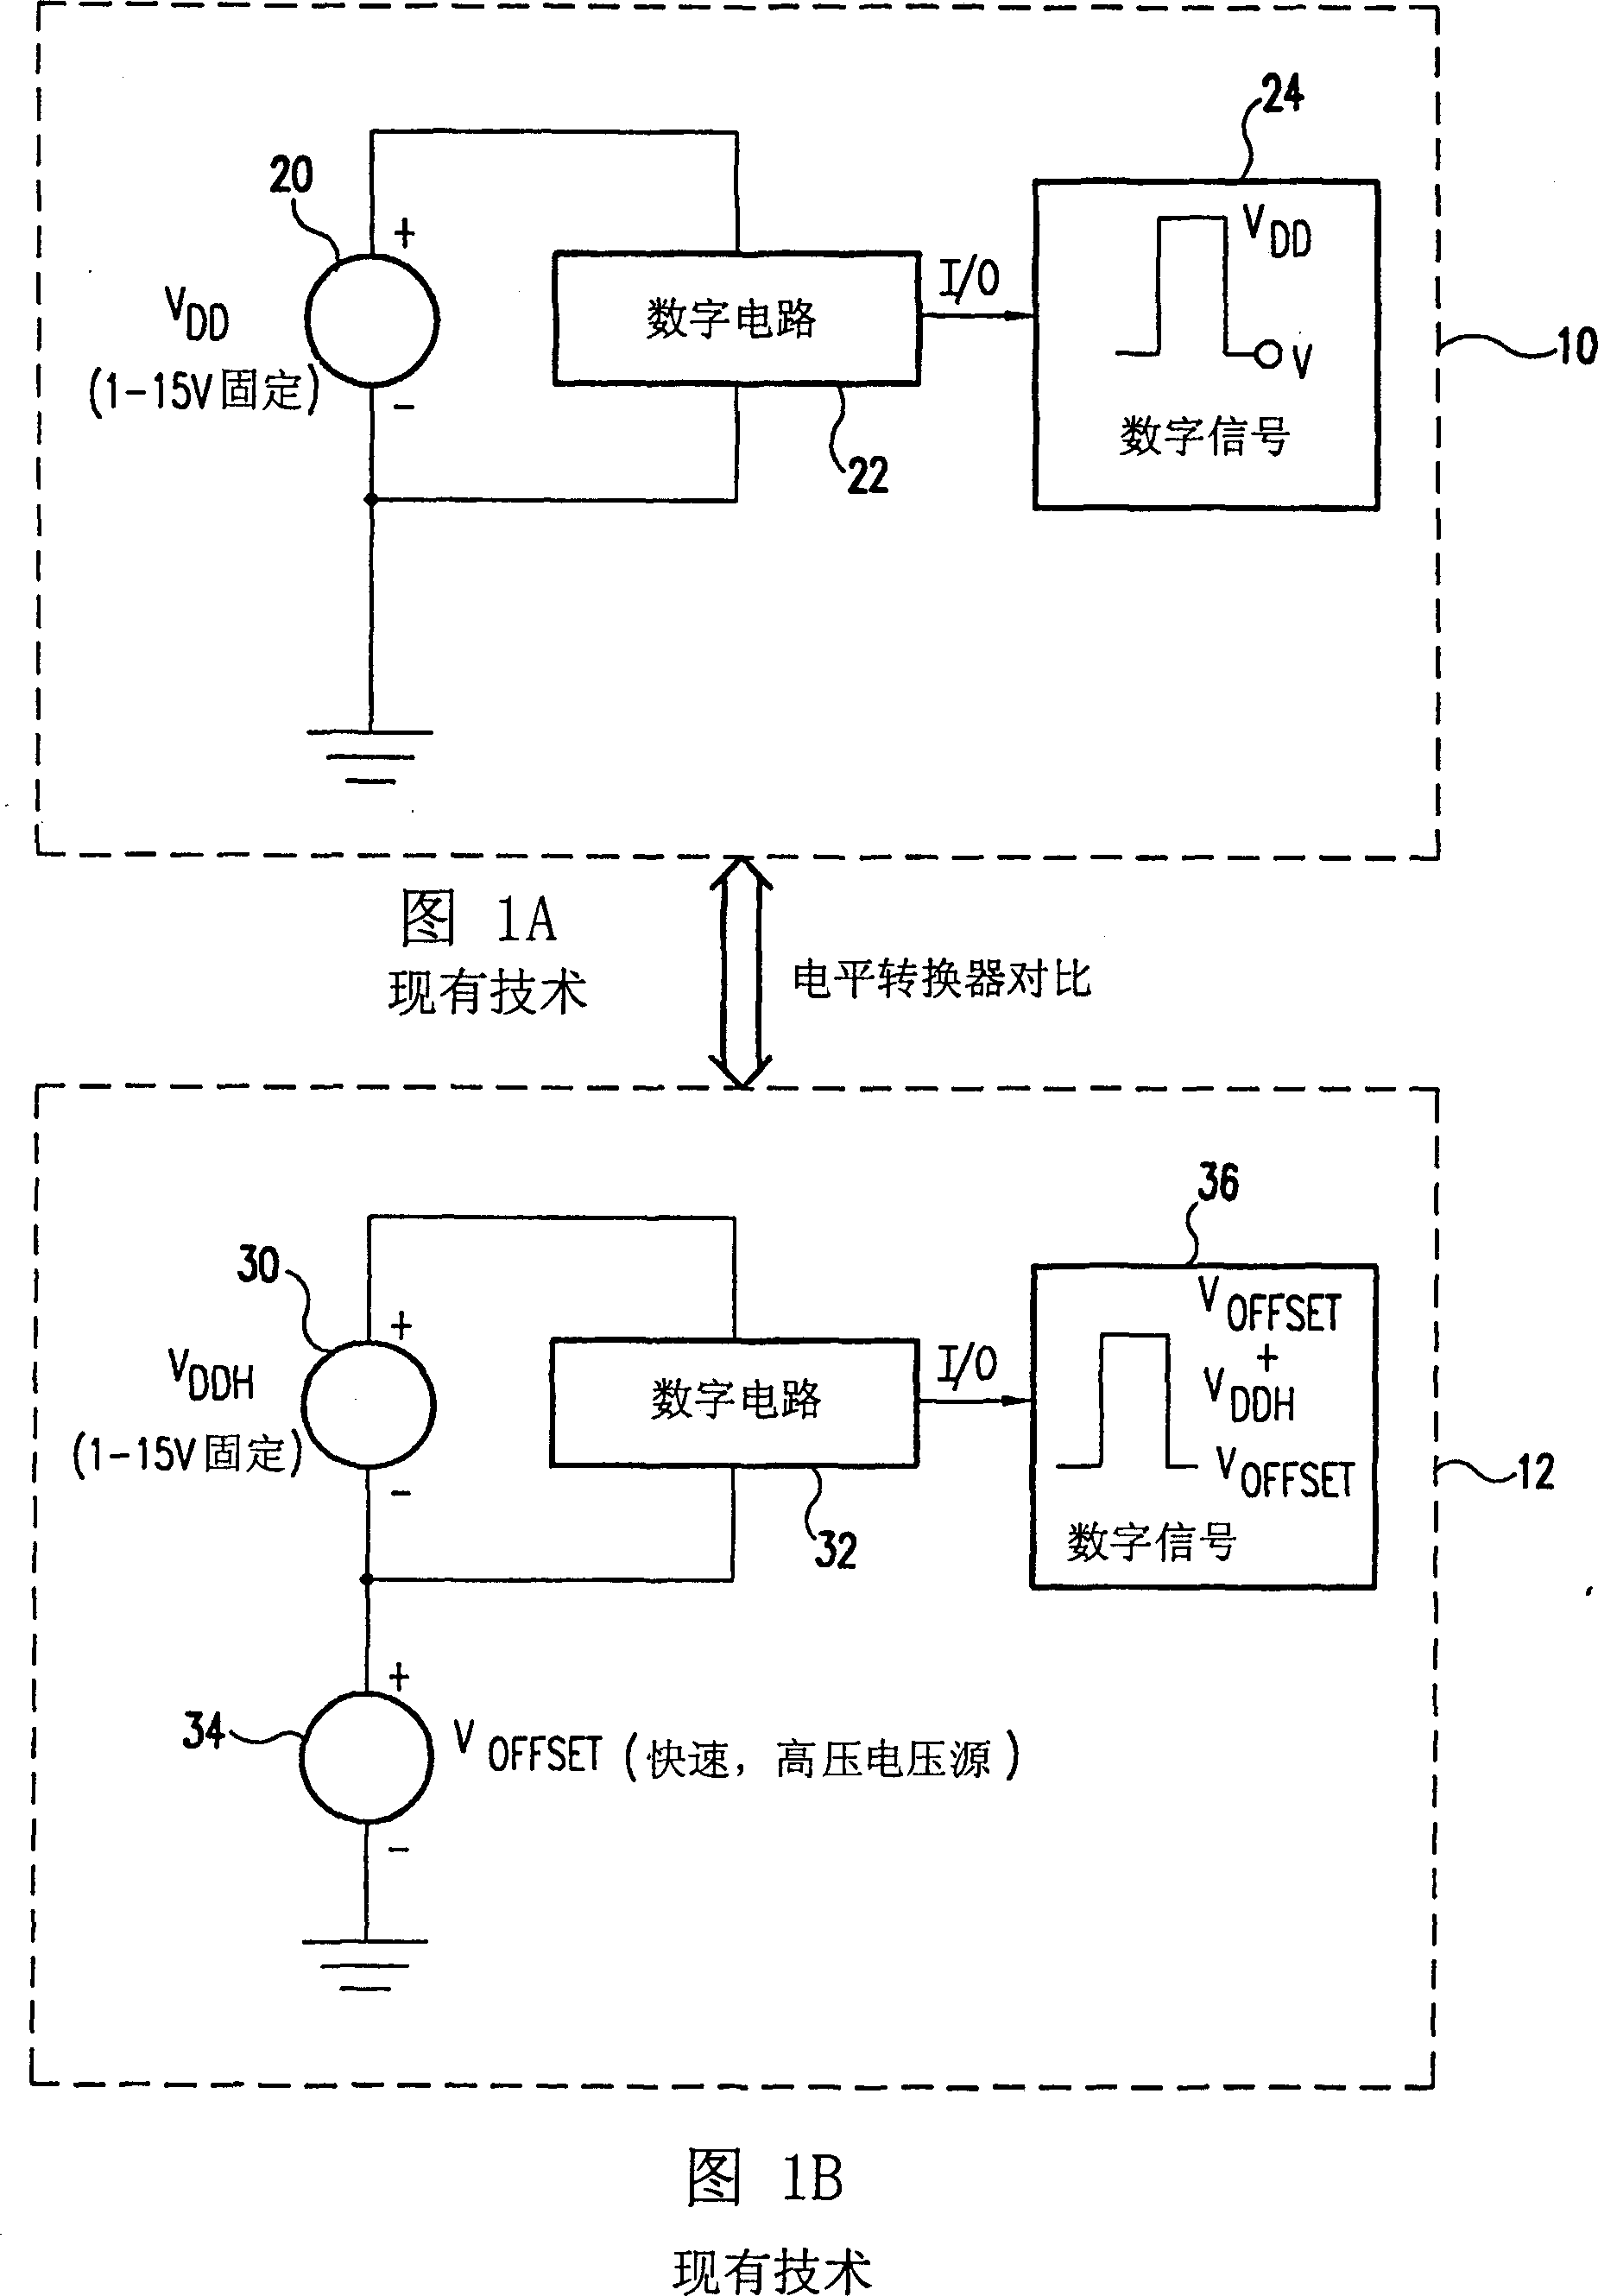 Digital level shifter with reduced power dissipation and false transmission blocking